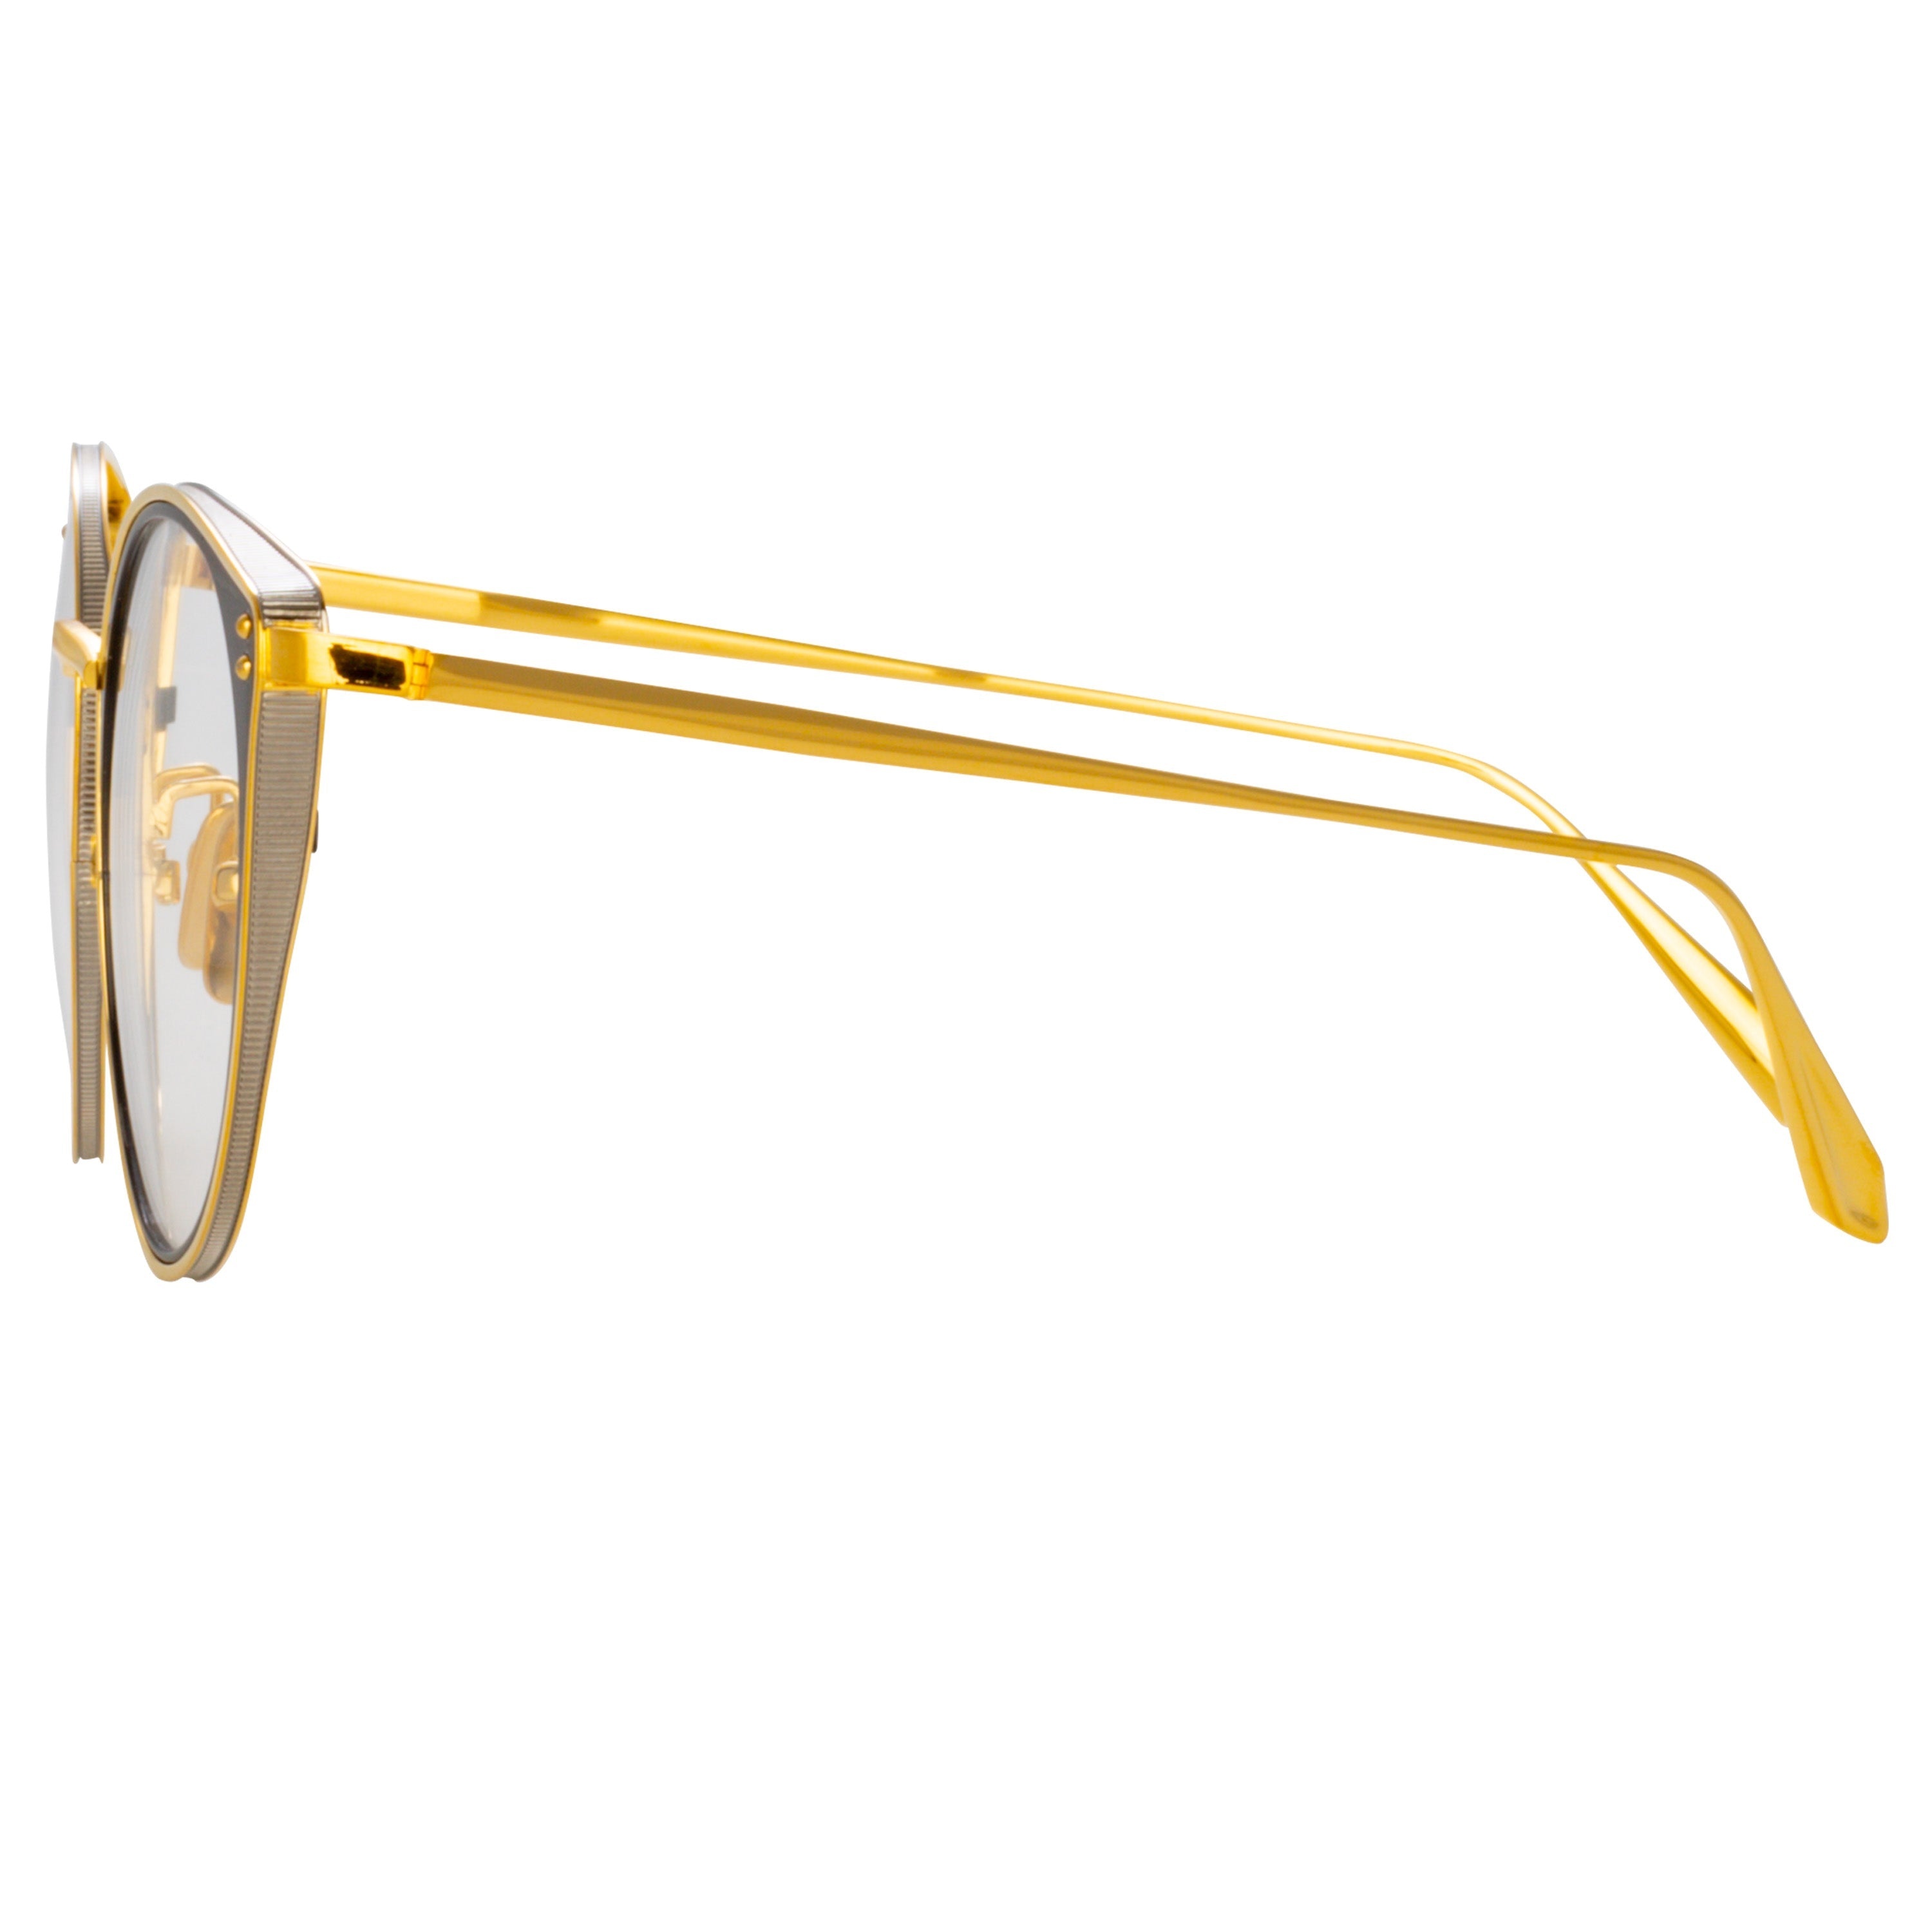 NEUSA OVAL OPTICAL FRAME IN YELLOW GOLD - 5